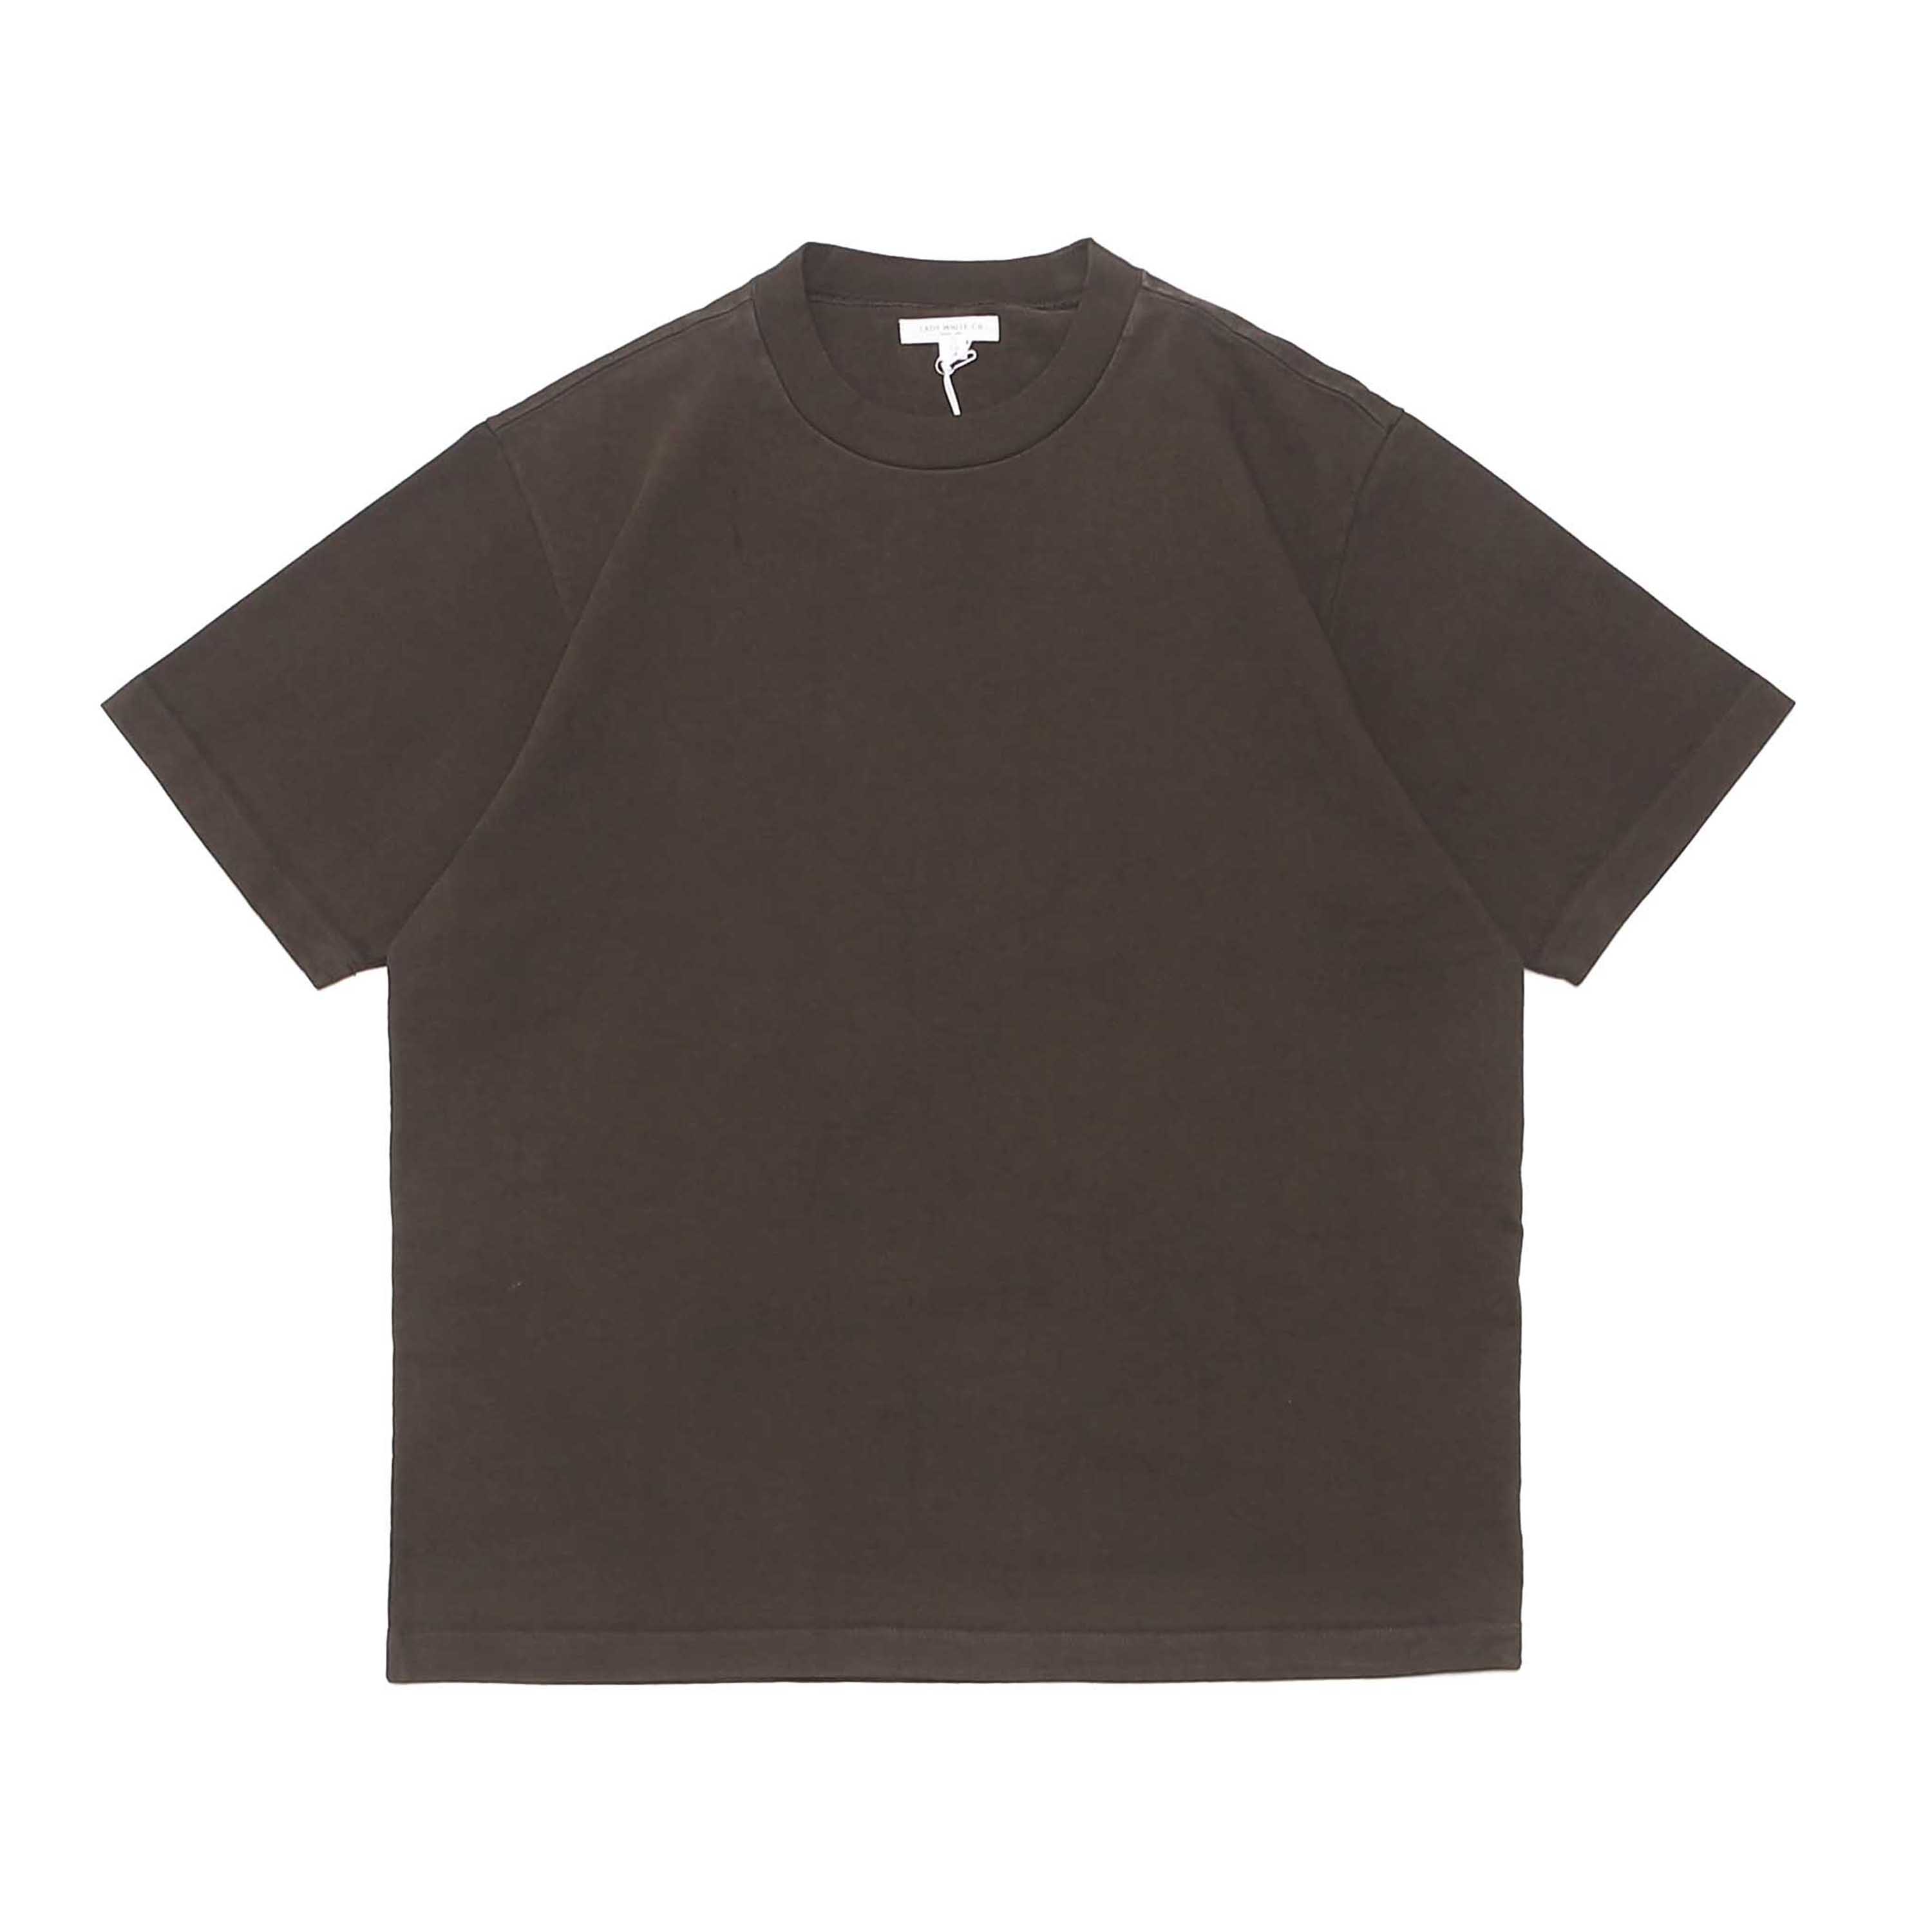 RUGBY S/S T-SHIRT - FIELD BROWN